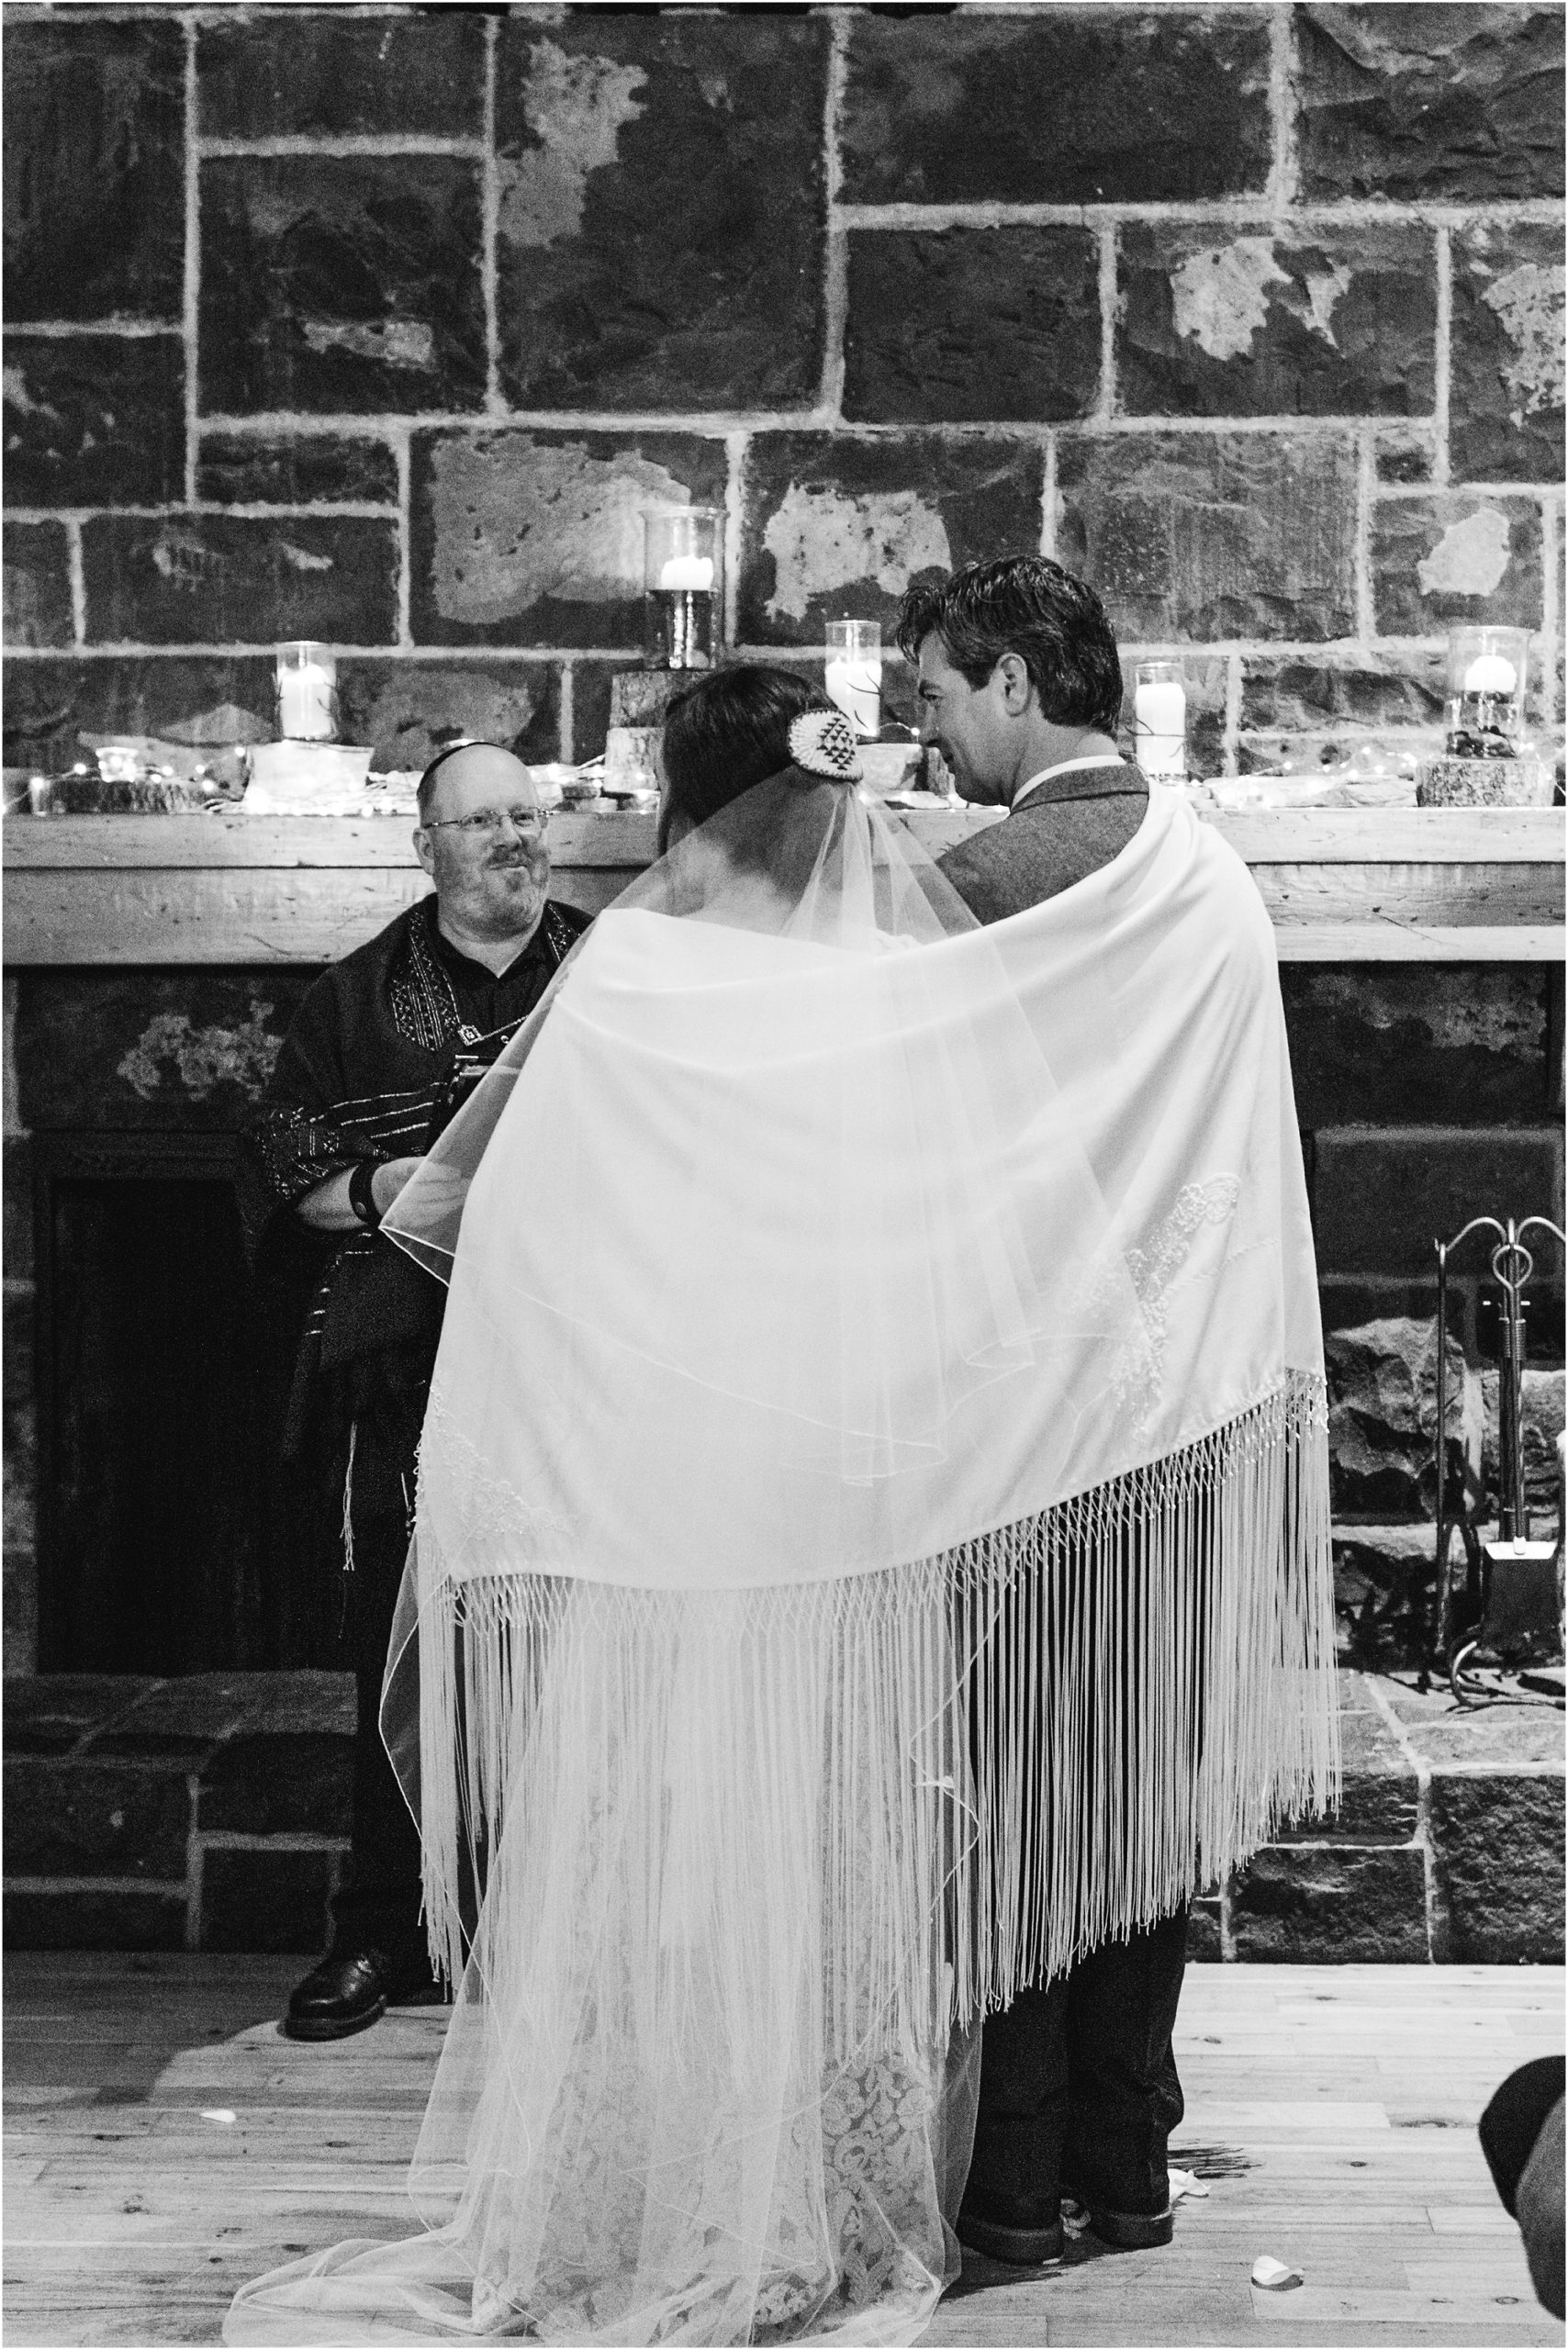 The bride and groom are wrapped in a prayer shawl incorporating Jewish and Native American traditions during their intimate ceremony at the Fireside Room at their Sunriver Resort winter wedding in Oregon. | Erica Swantek Photography